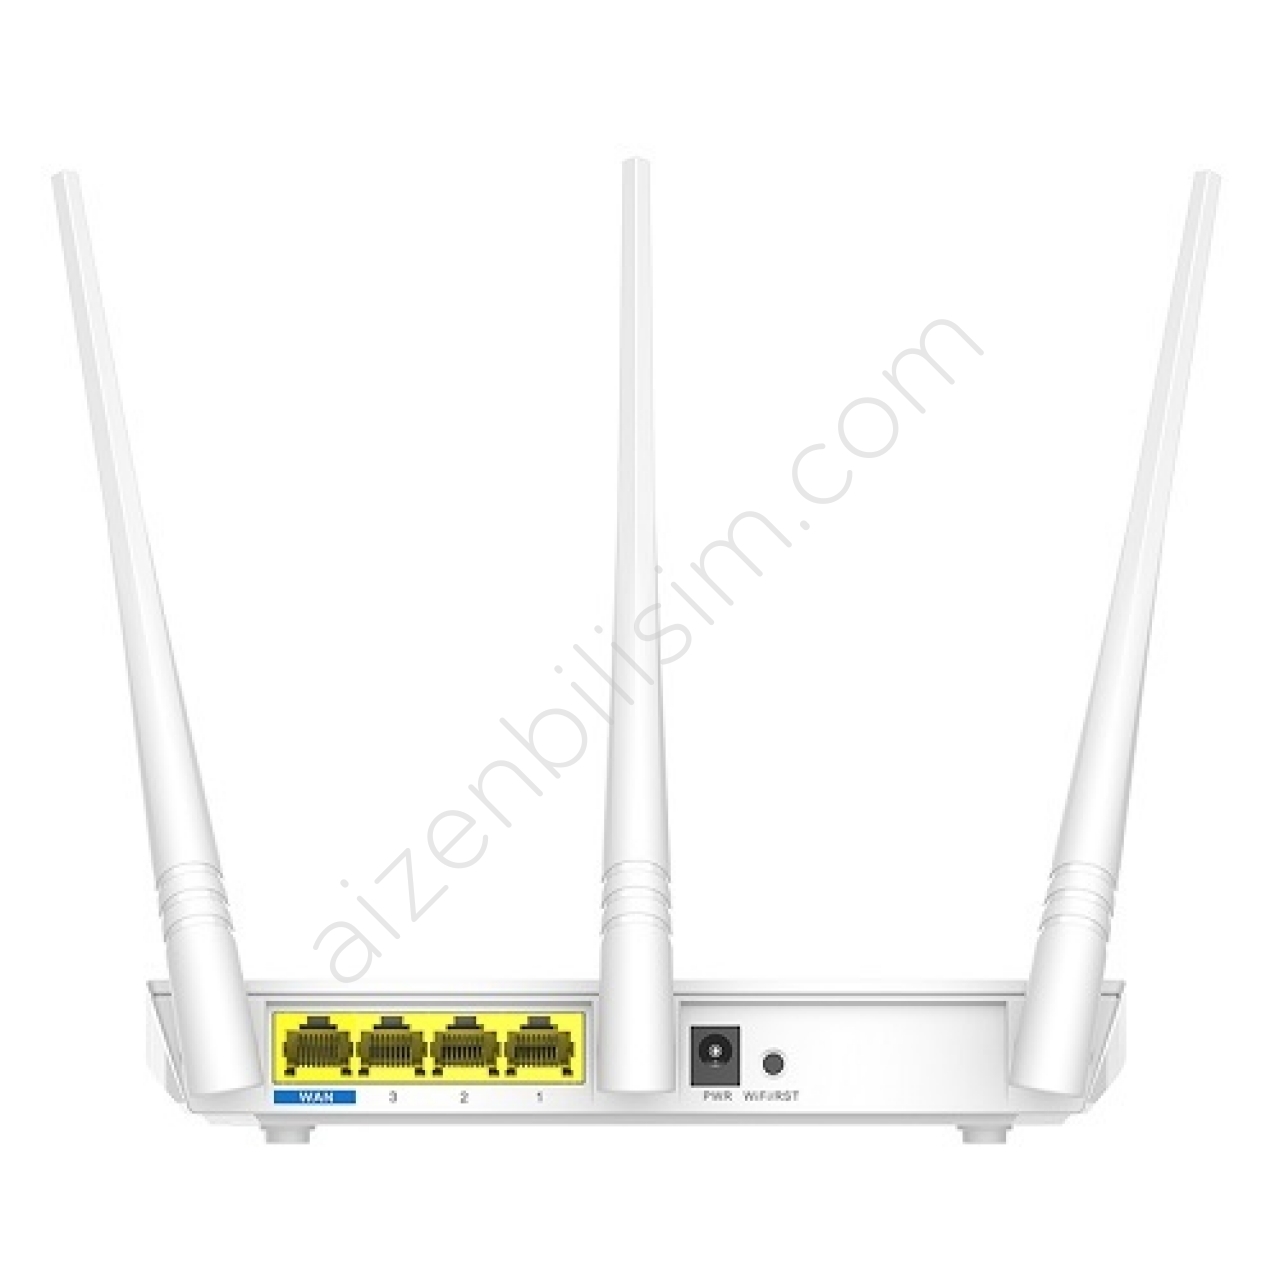 TENDA F3 4 PORT WiFi-N 300Mbps ROUTER/A.POINT 3 ANTEN